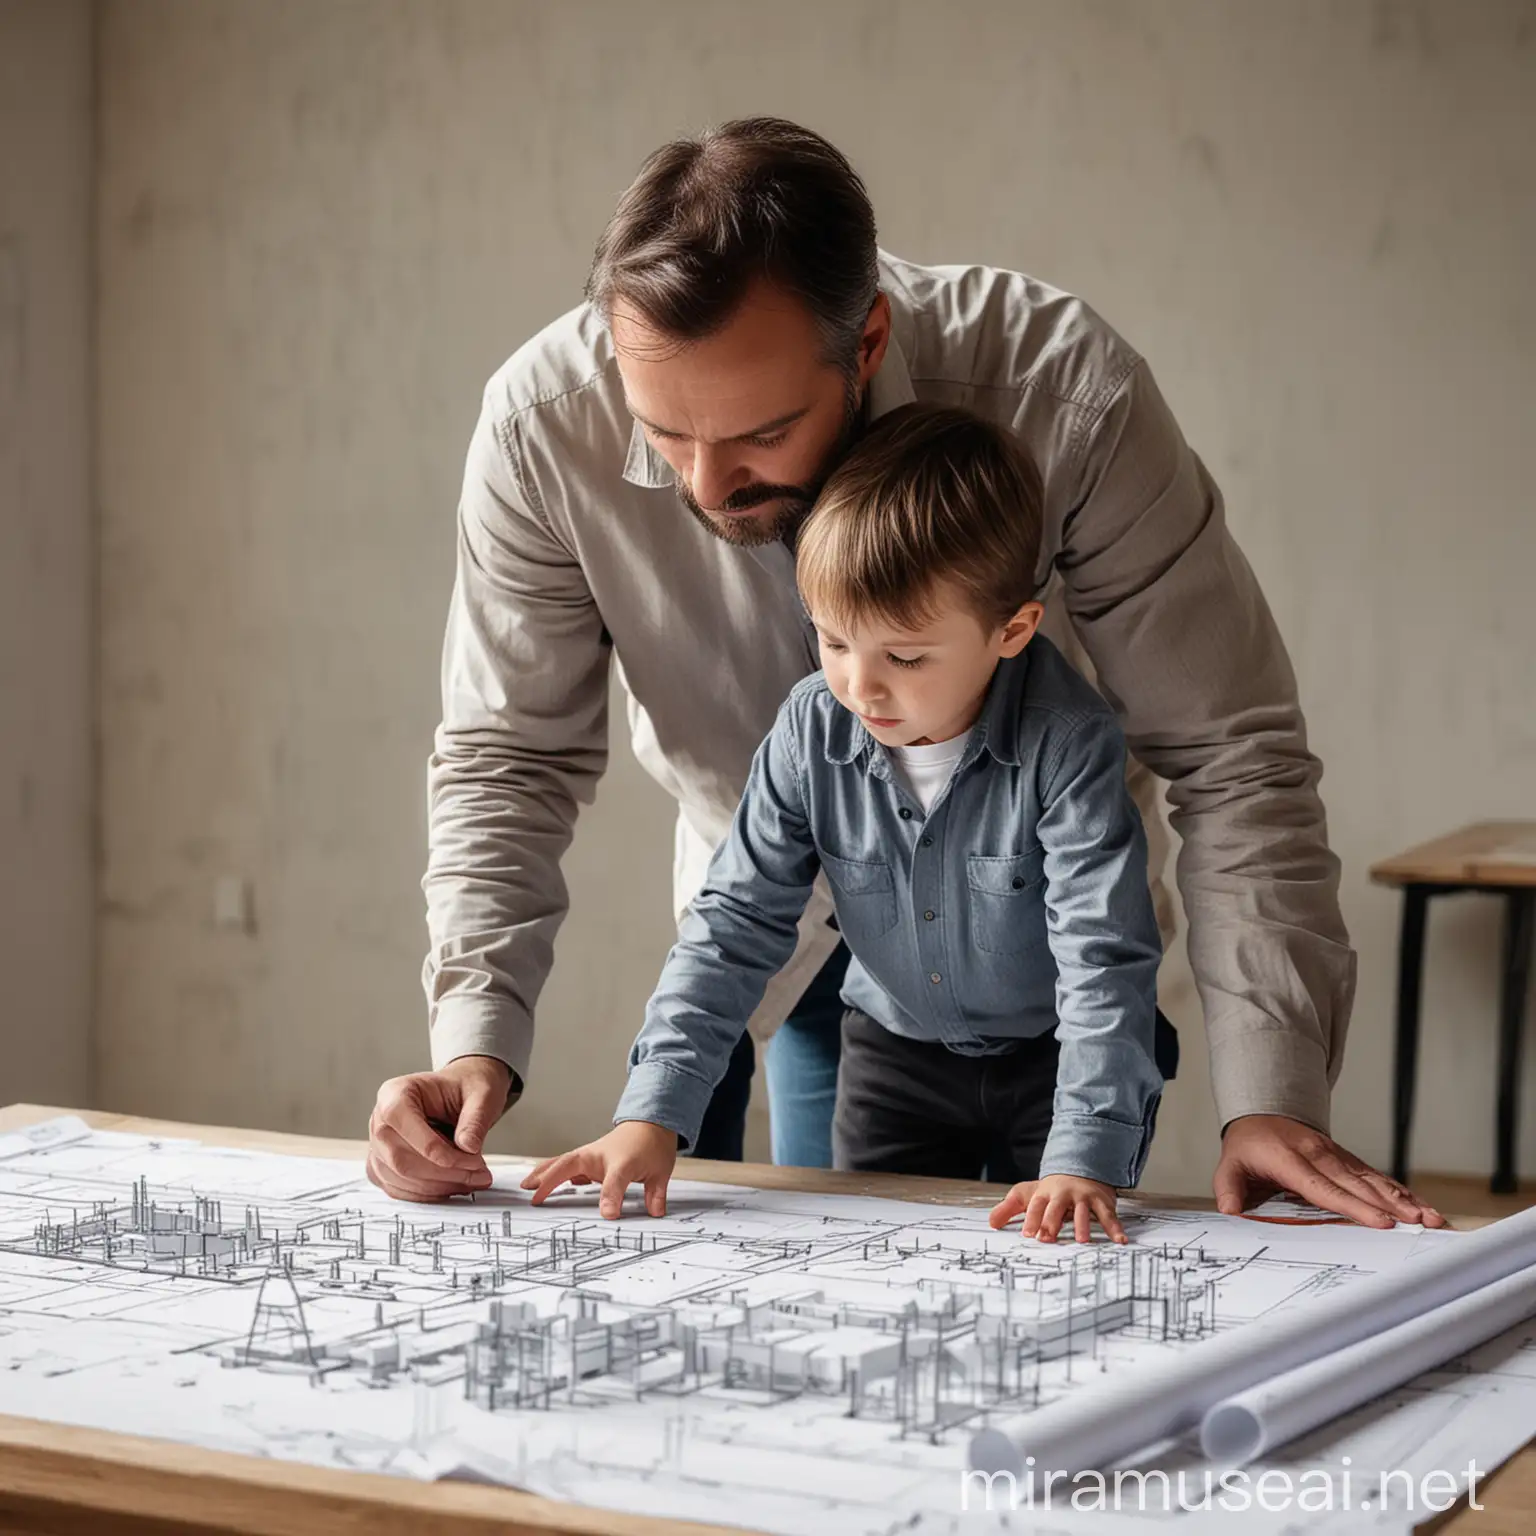 Architect Father and Son Collaborate on Architectural Project